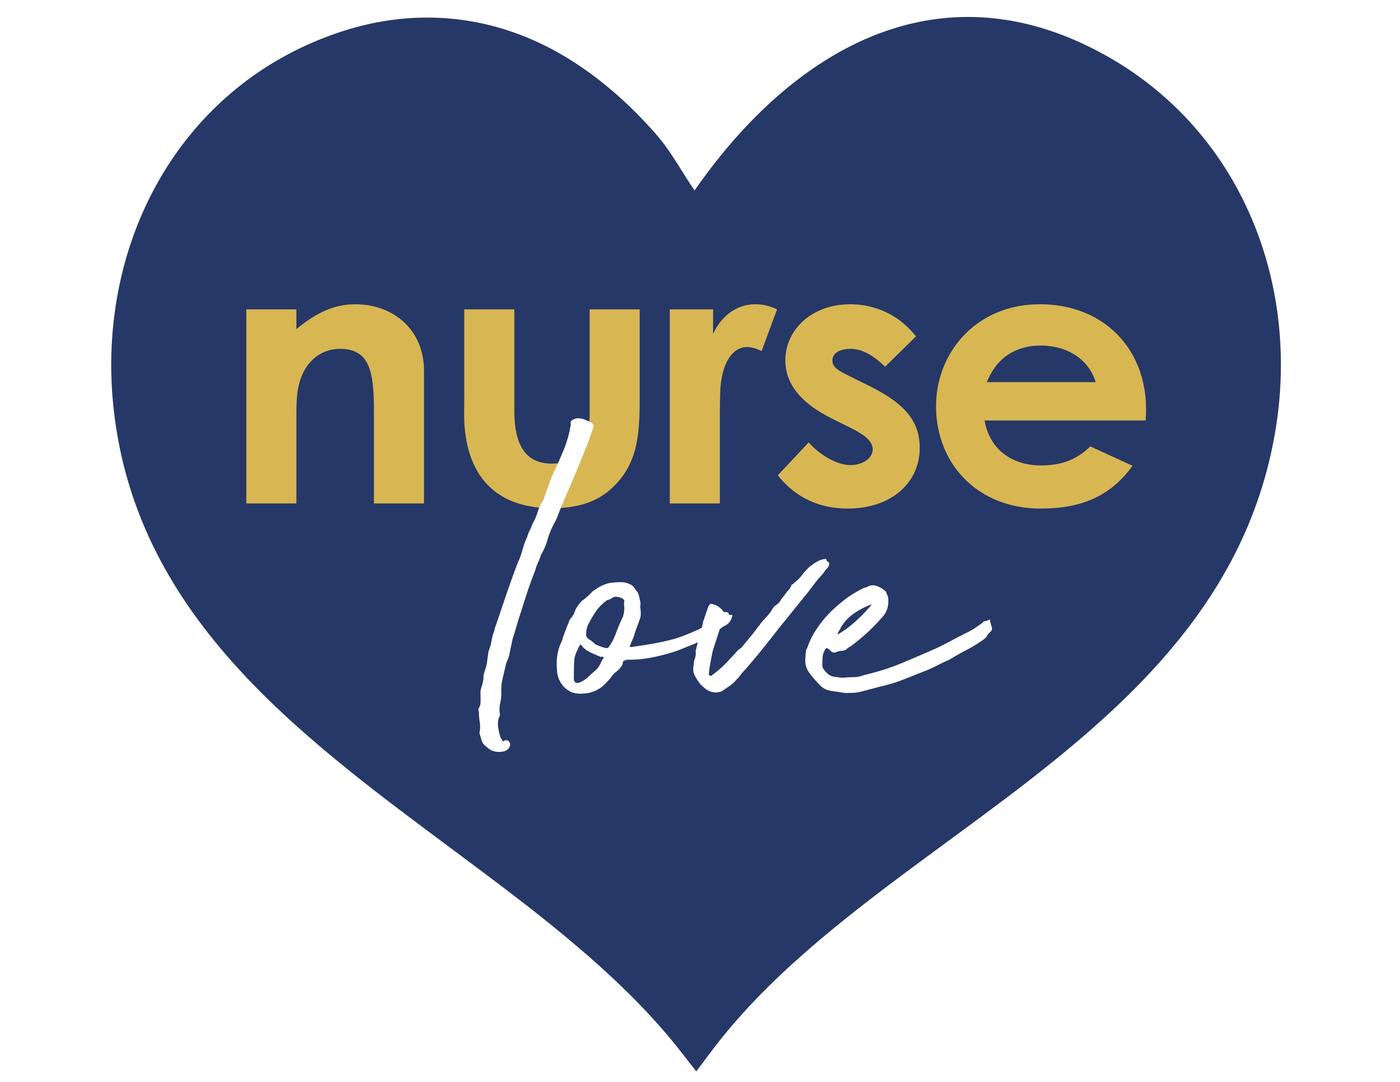 Show Your Love: Window Signs & Photo Props for Nurses Week